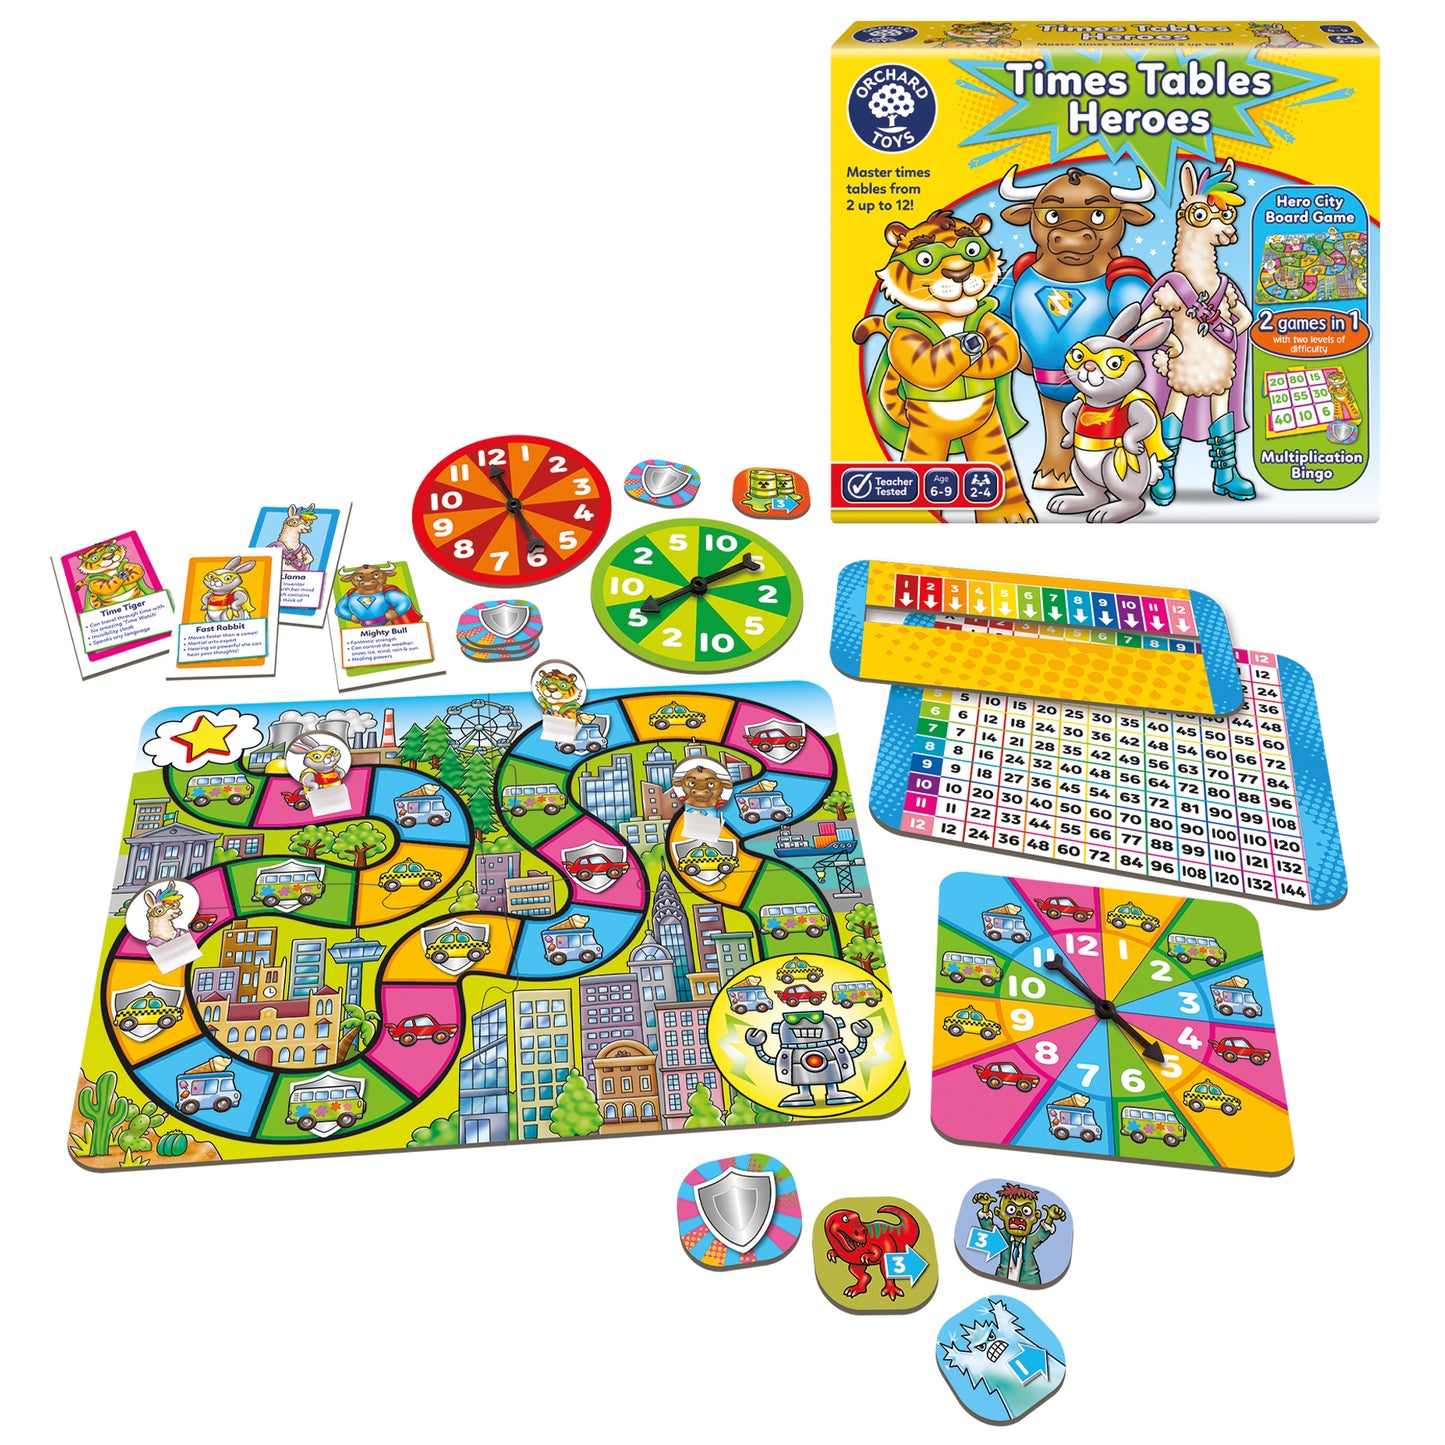 Orchard Toys Times Tables Heroes Board Game 乘法英雄棋盤遊戲